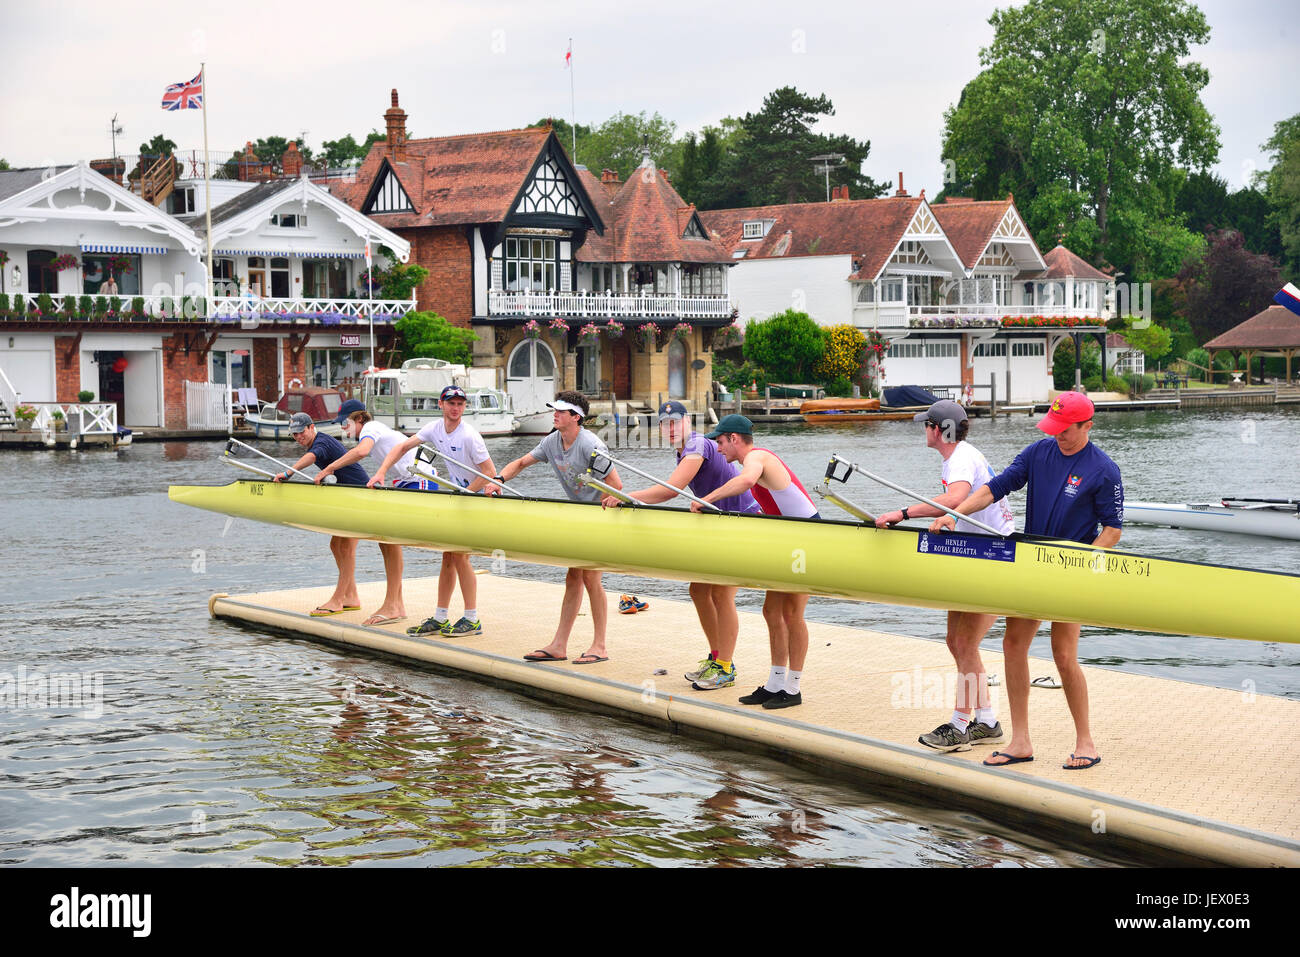 Crew lifting their boat out of the water at the Henley Royal Regatta 2017, Henley-on-Thames, Oxon, UK, England Stock Photo